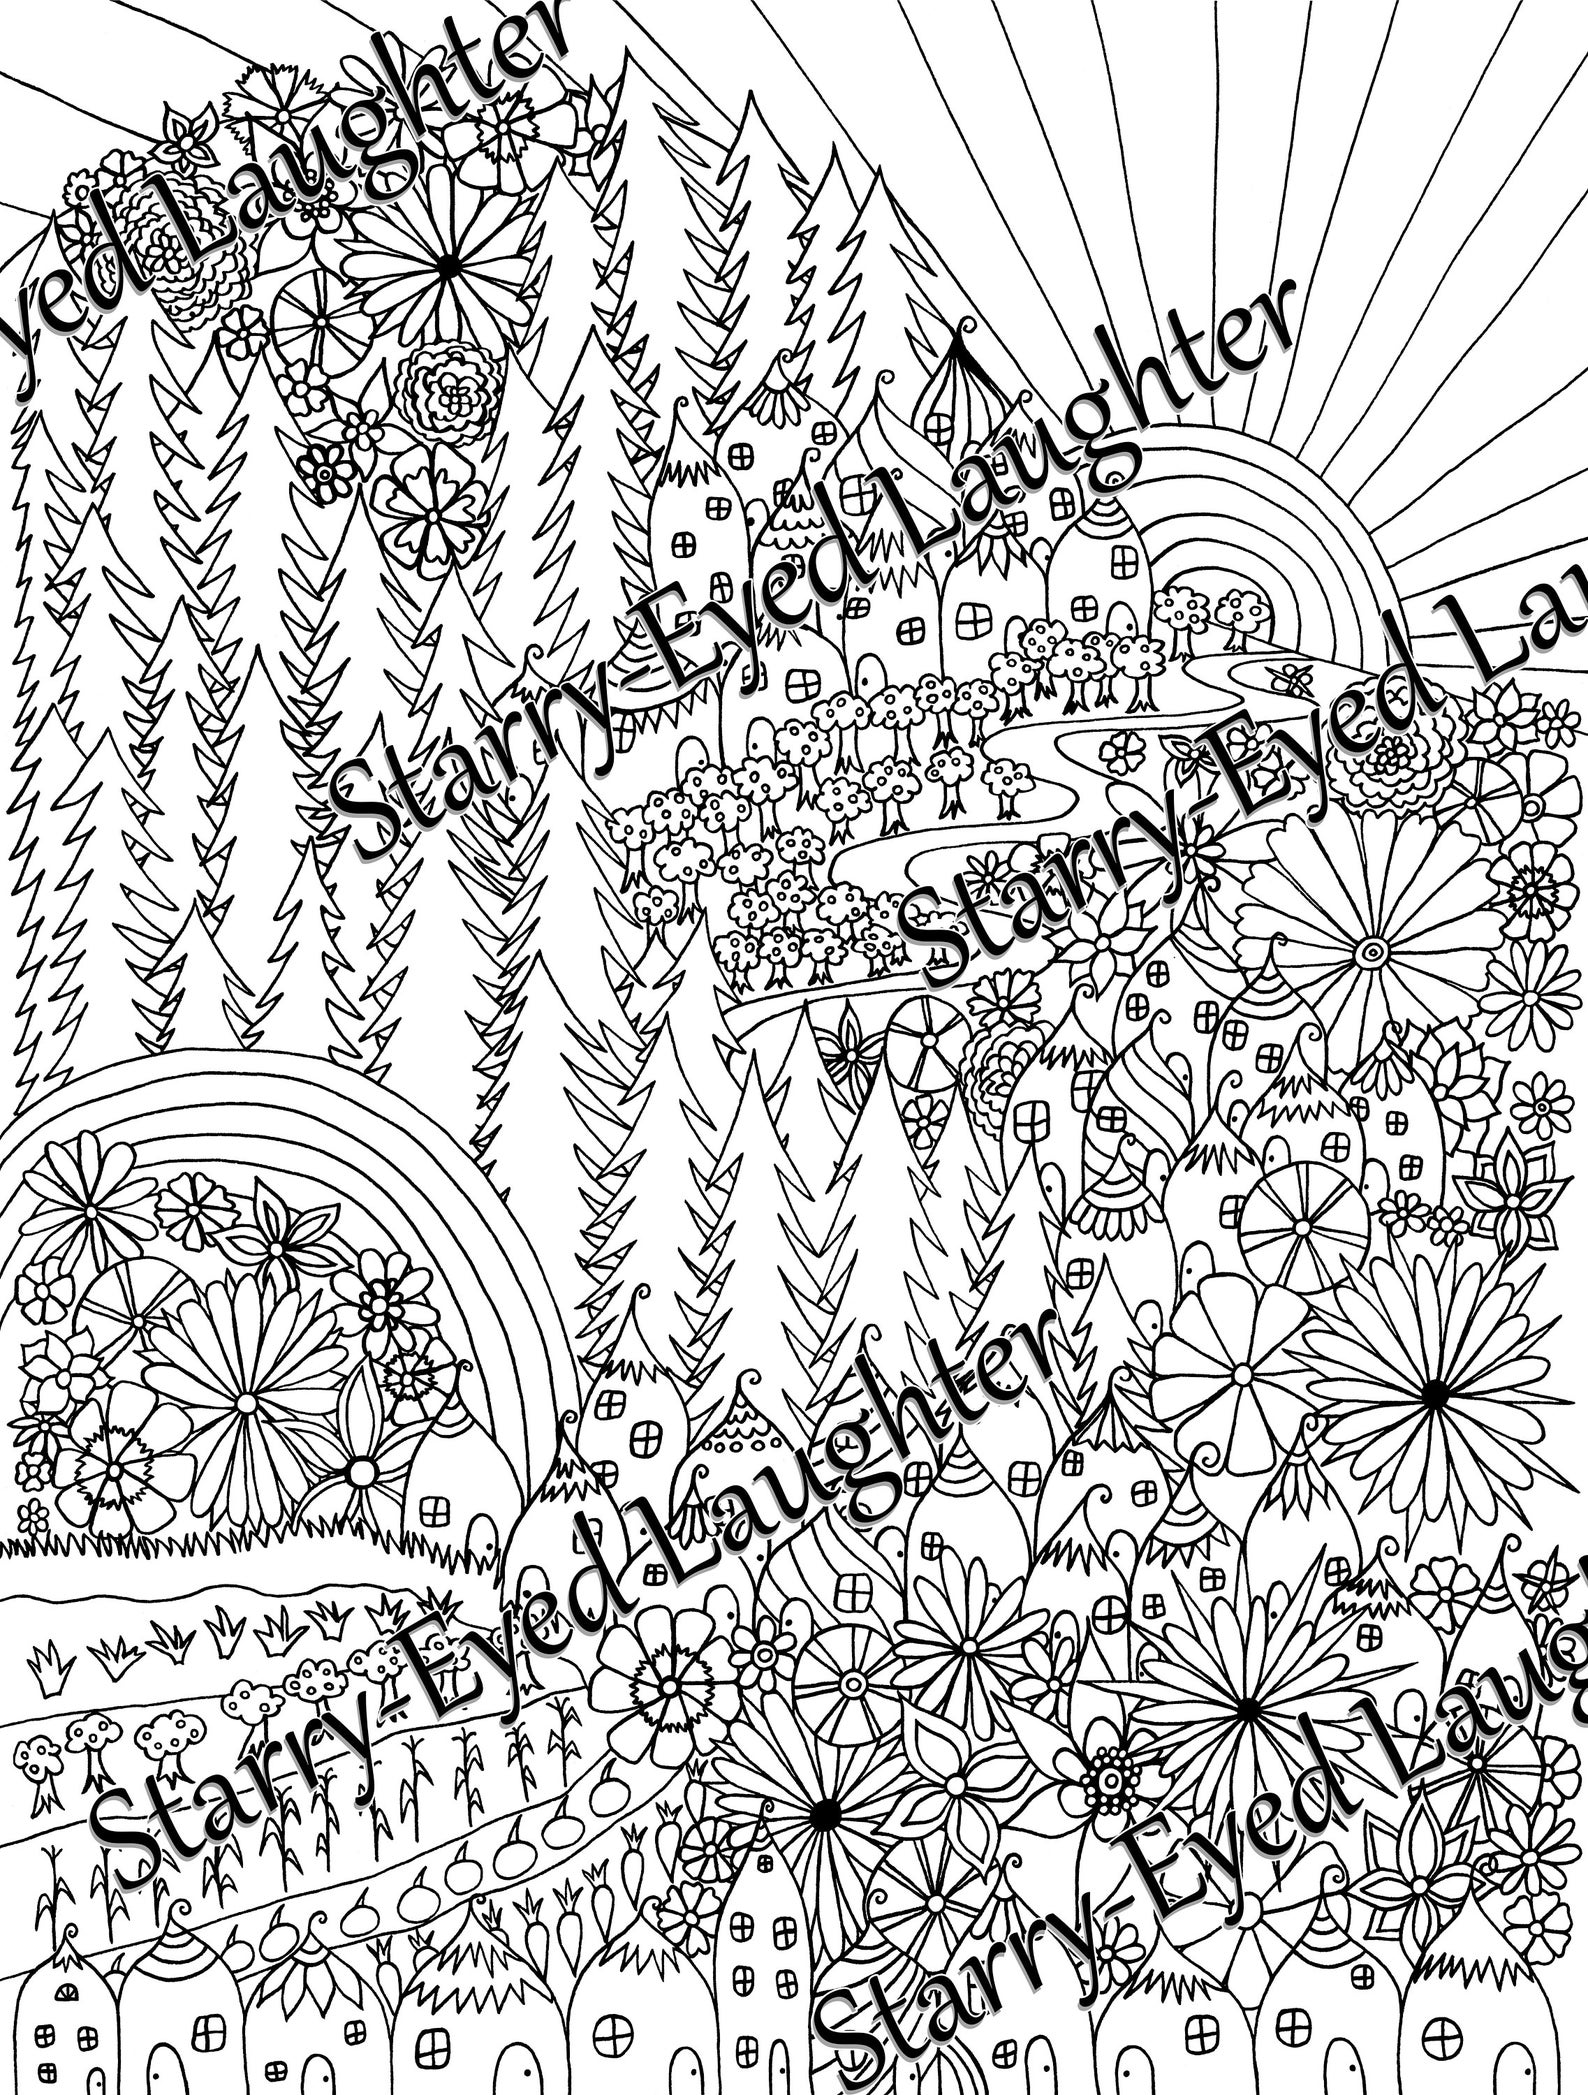 fairy-house-coloring-page-gnome-home-coloring-page-fantasy-etsy-canada